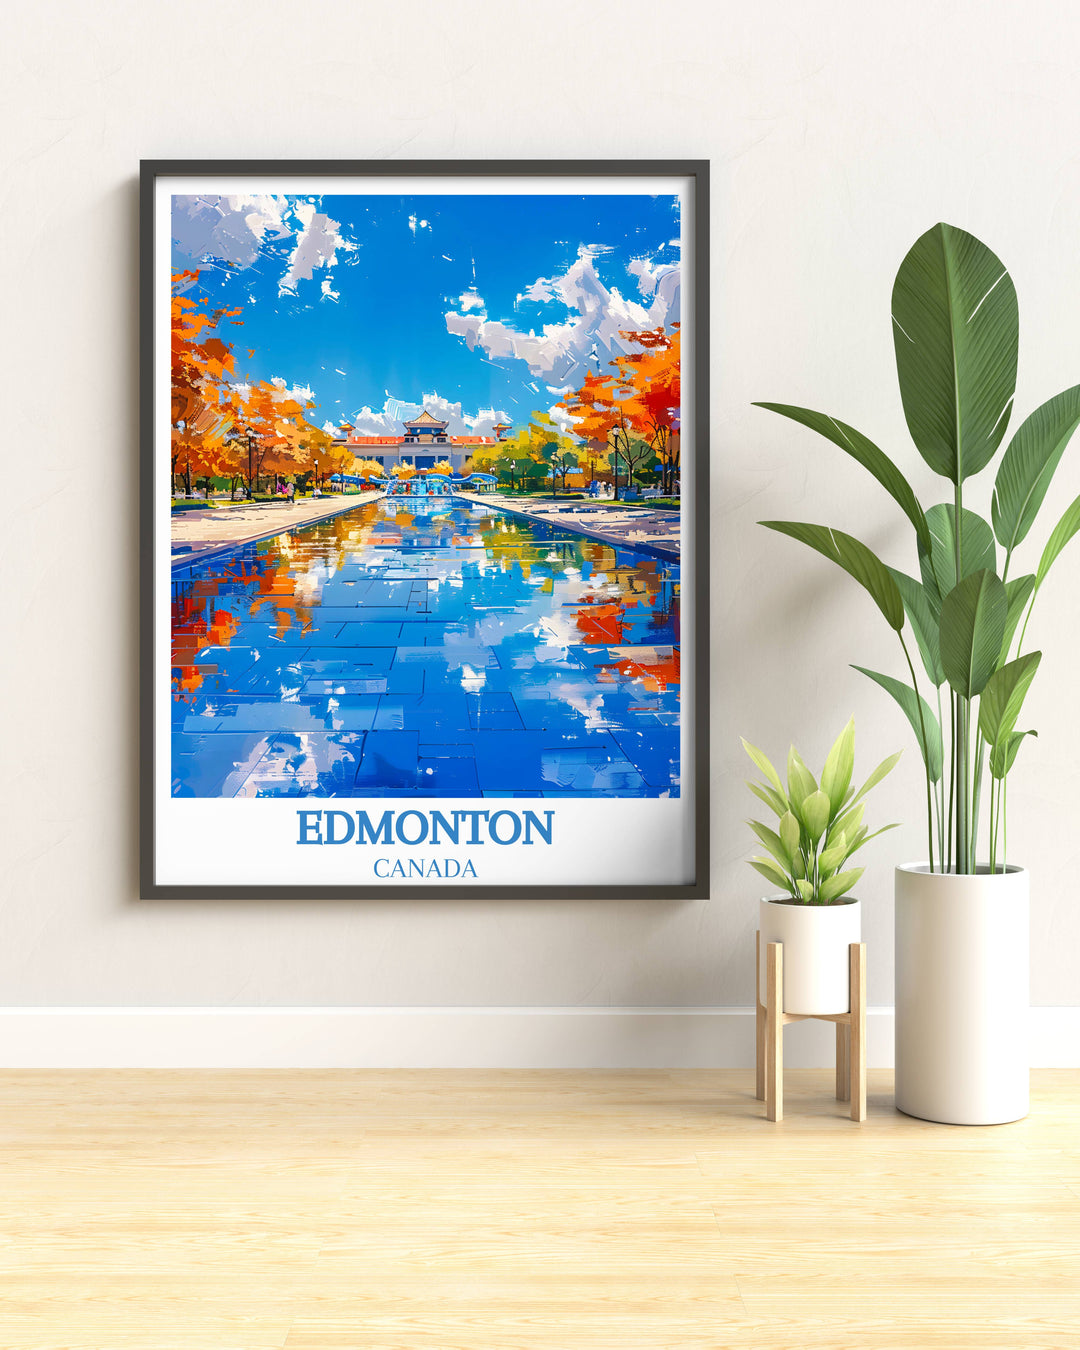 Vibrant Edmonton Travel Poster highlighting the famous Edmonton Folk Music Festival, bringing the city’s cultural scene to life in your home or office.